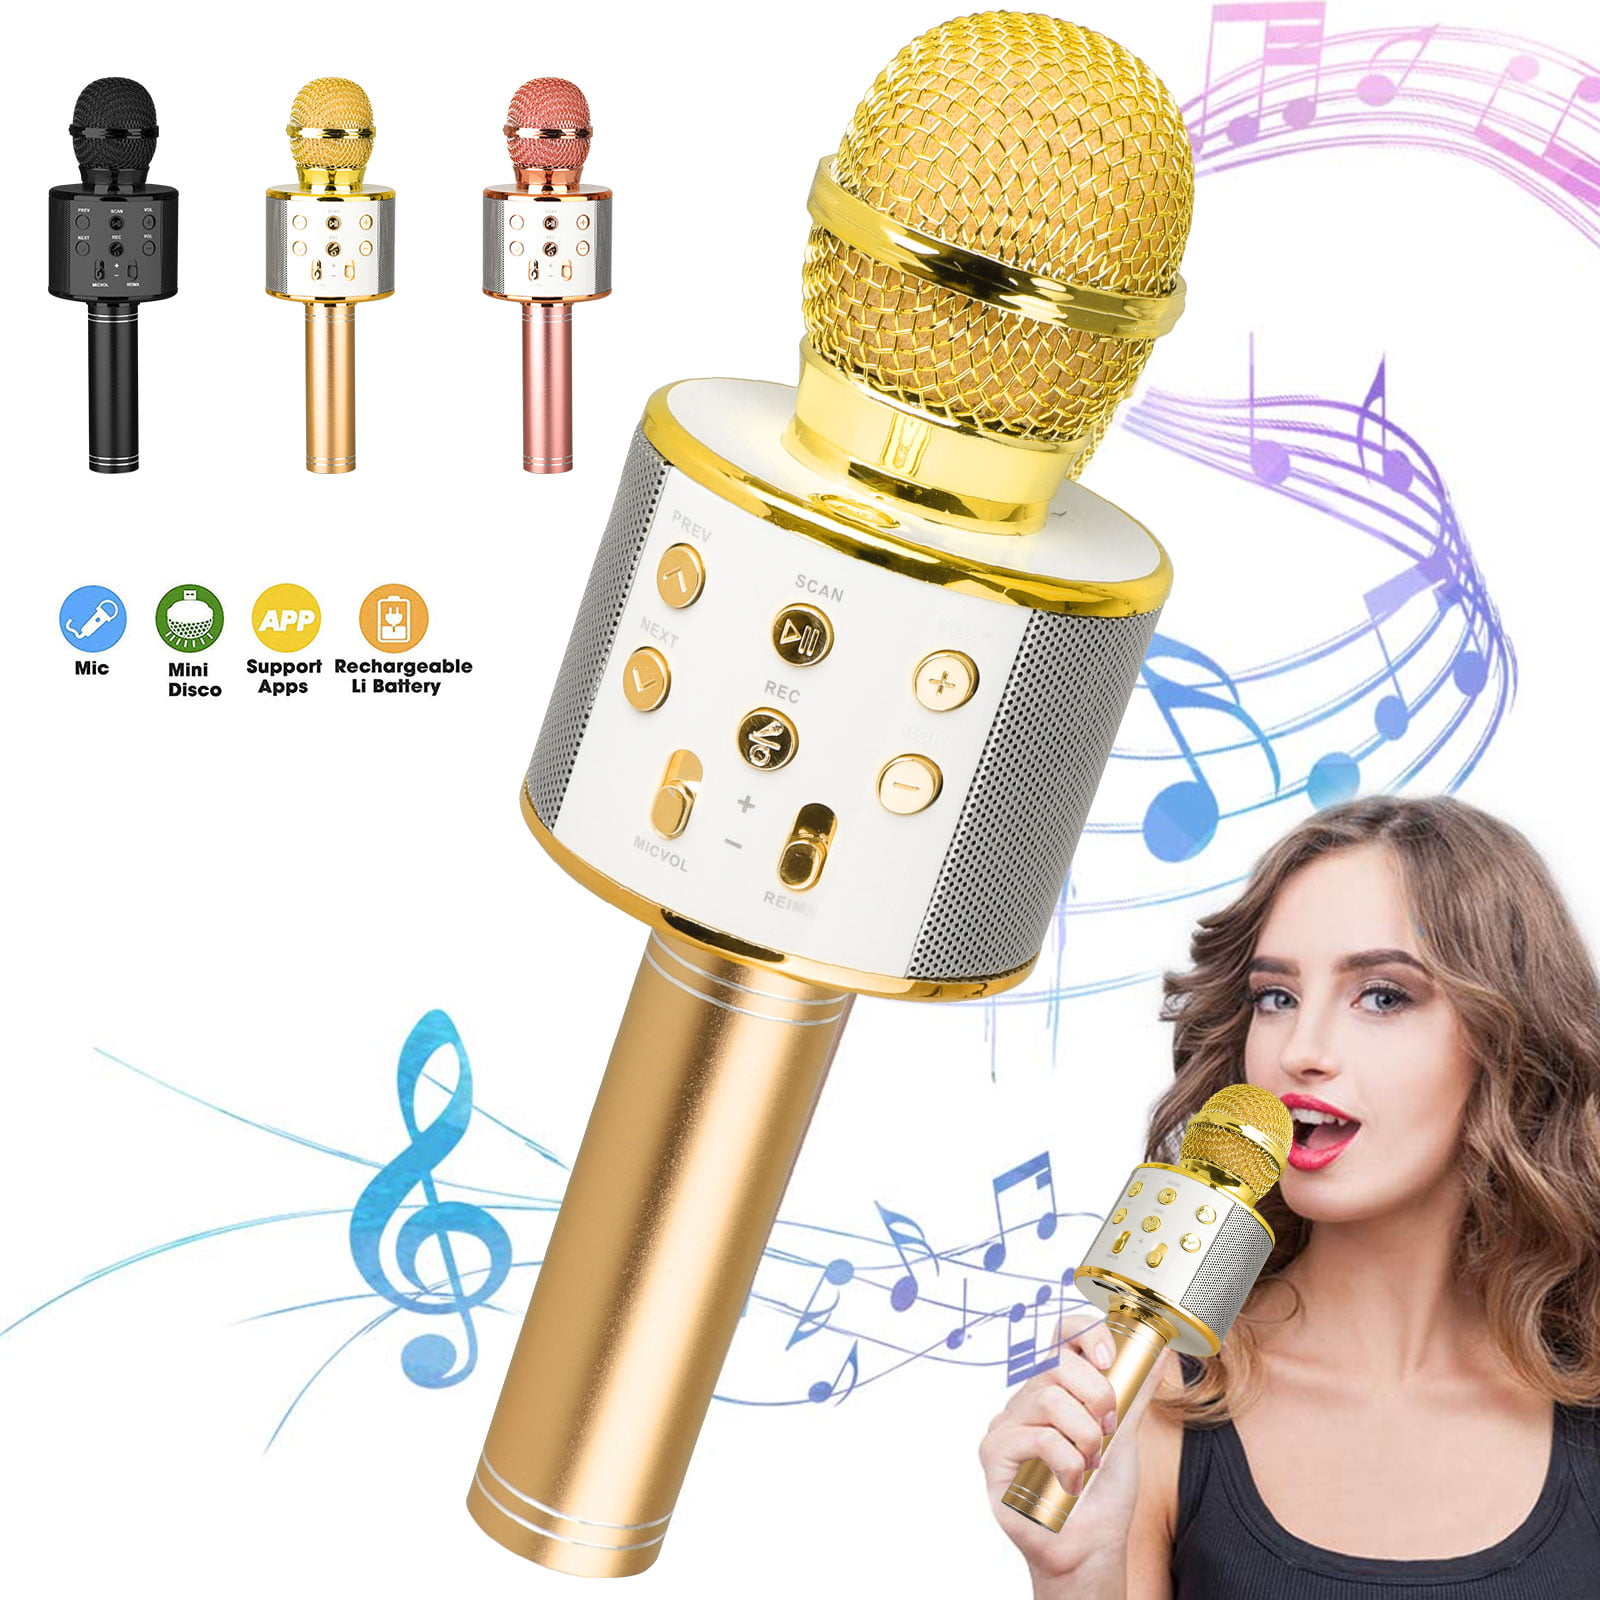 Superior Audio Quality For Singing & Recording Wireless Karaoke Microphones Speaker Compatible With Android & IOS Wireless Bluetooth Karaoke Micro 4 In 1 Handheld Portable Bluetooth Home KTV Player 